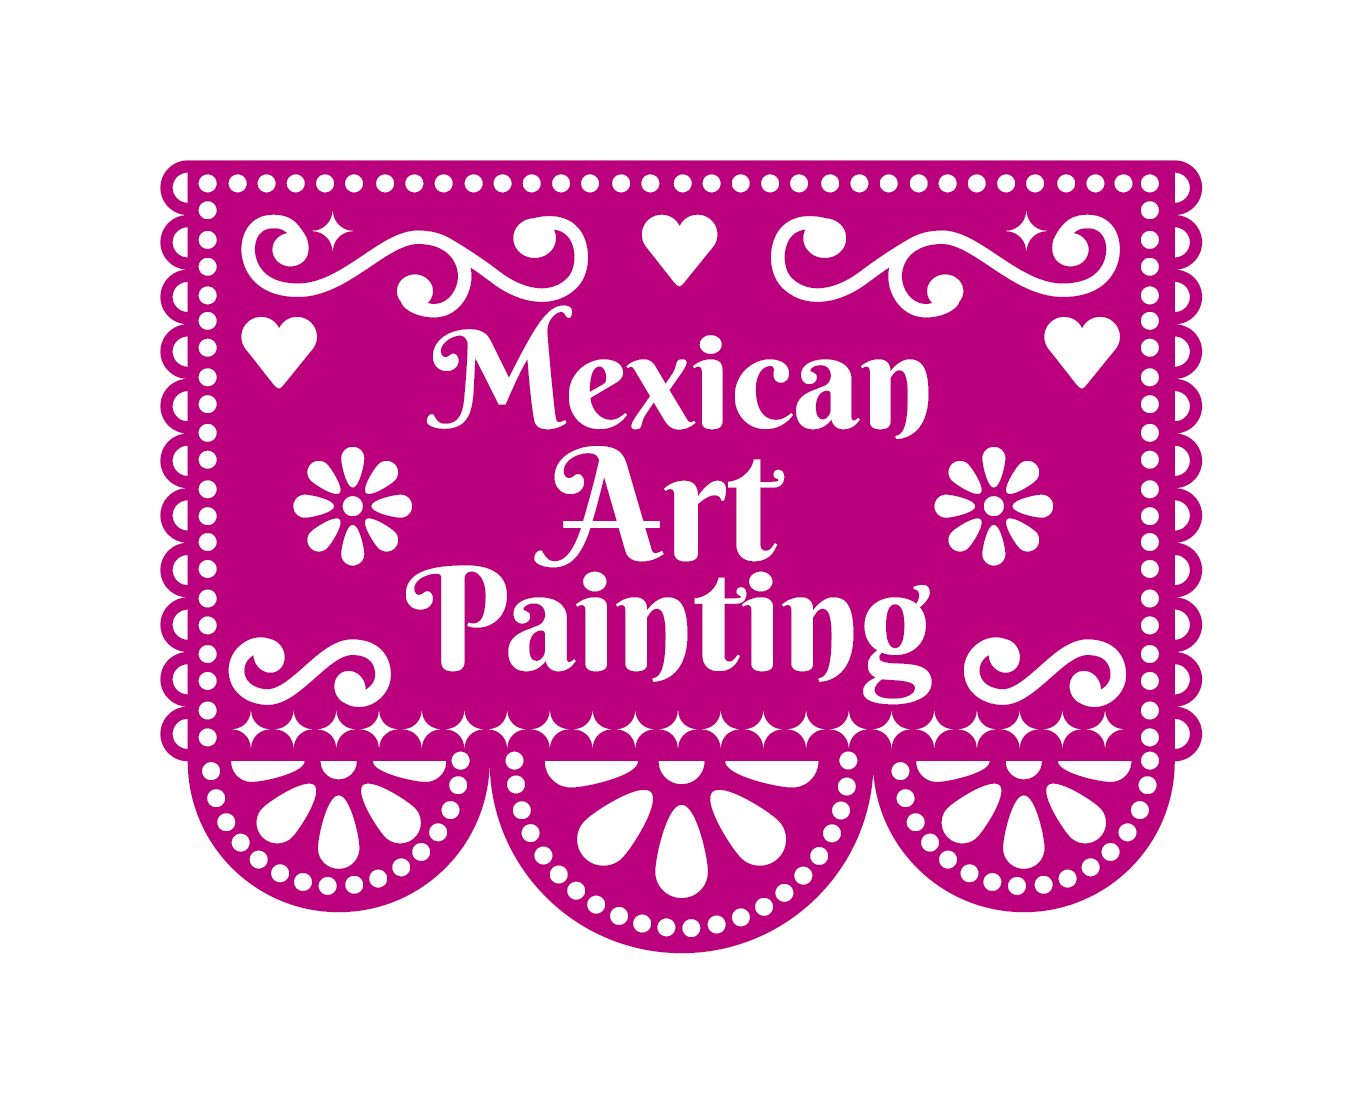 Mexican Art Painting